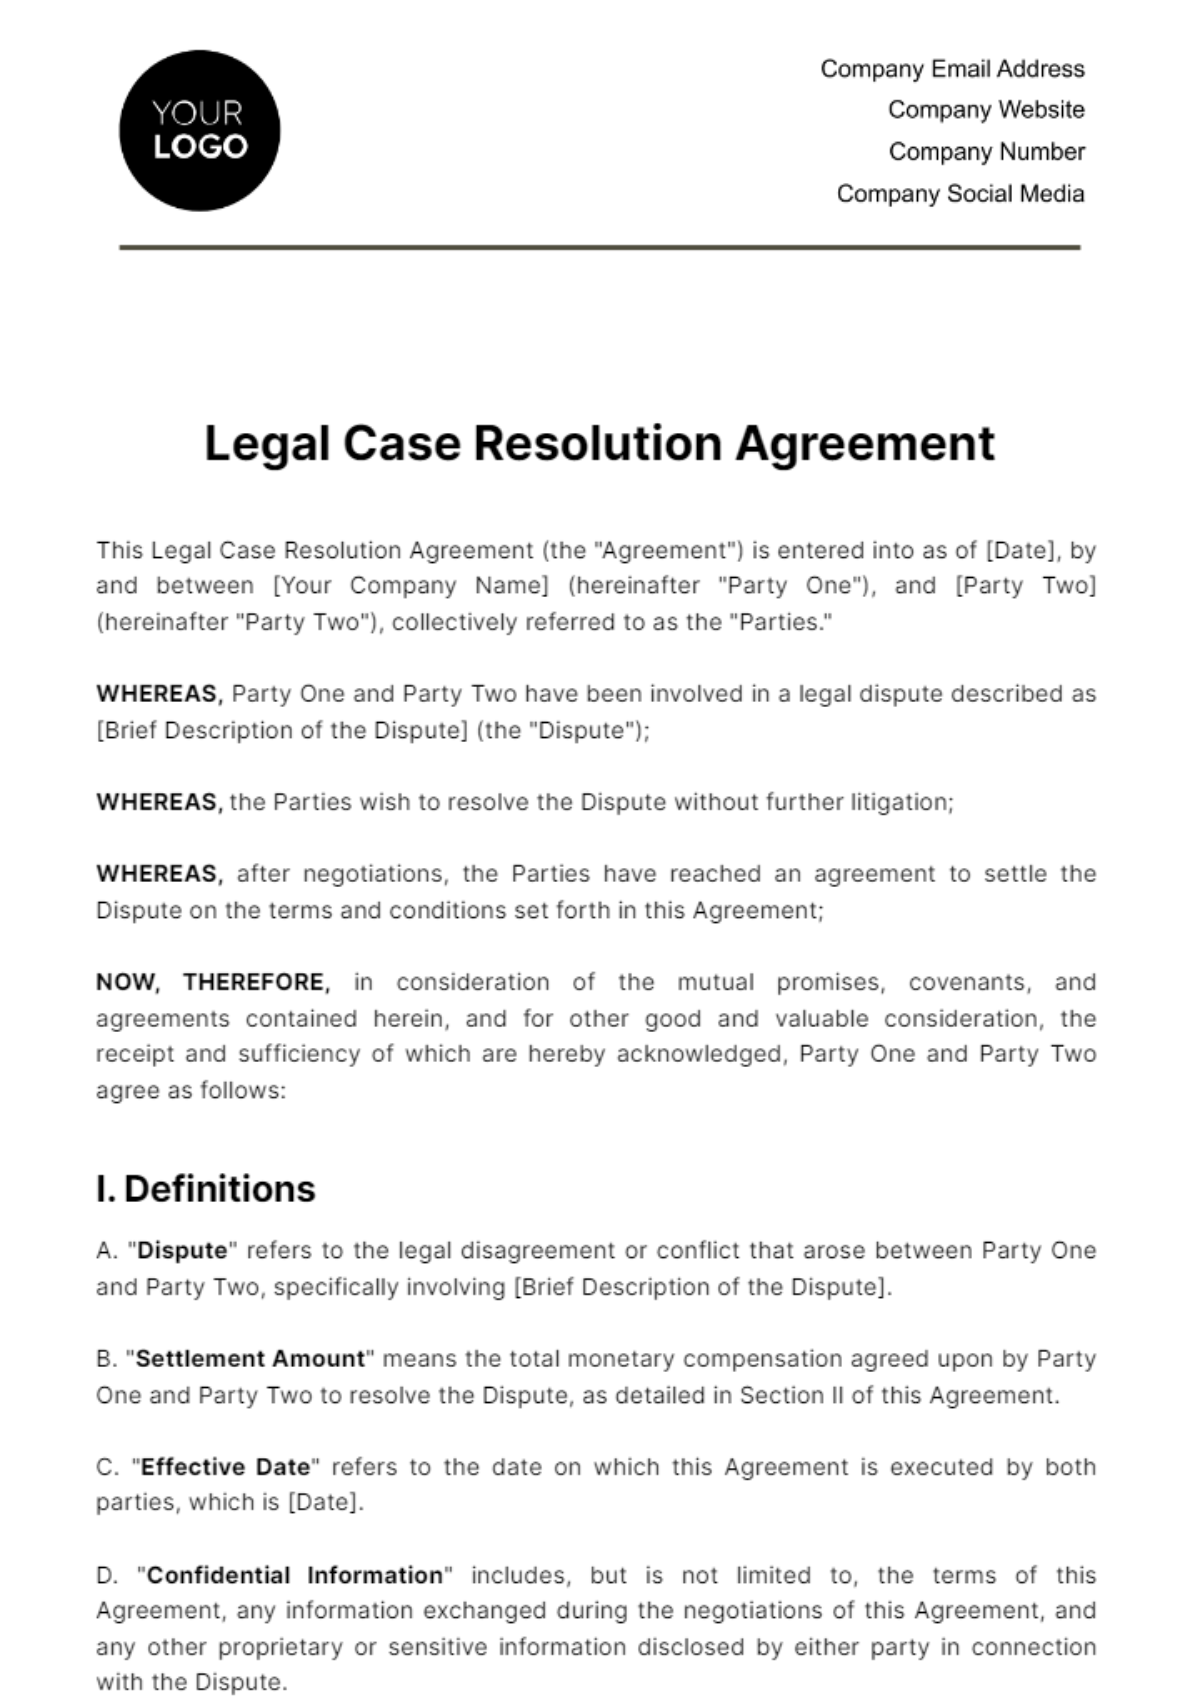 Free Legal Case Resolution Agreement Template